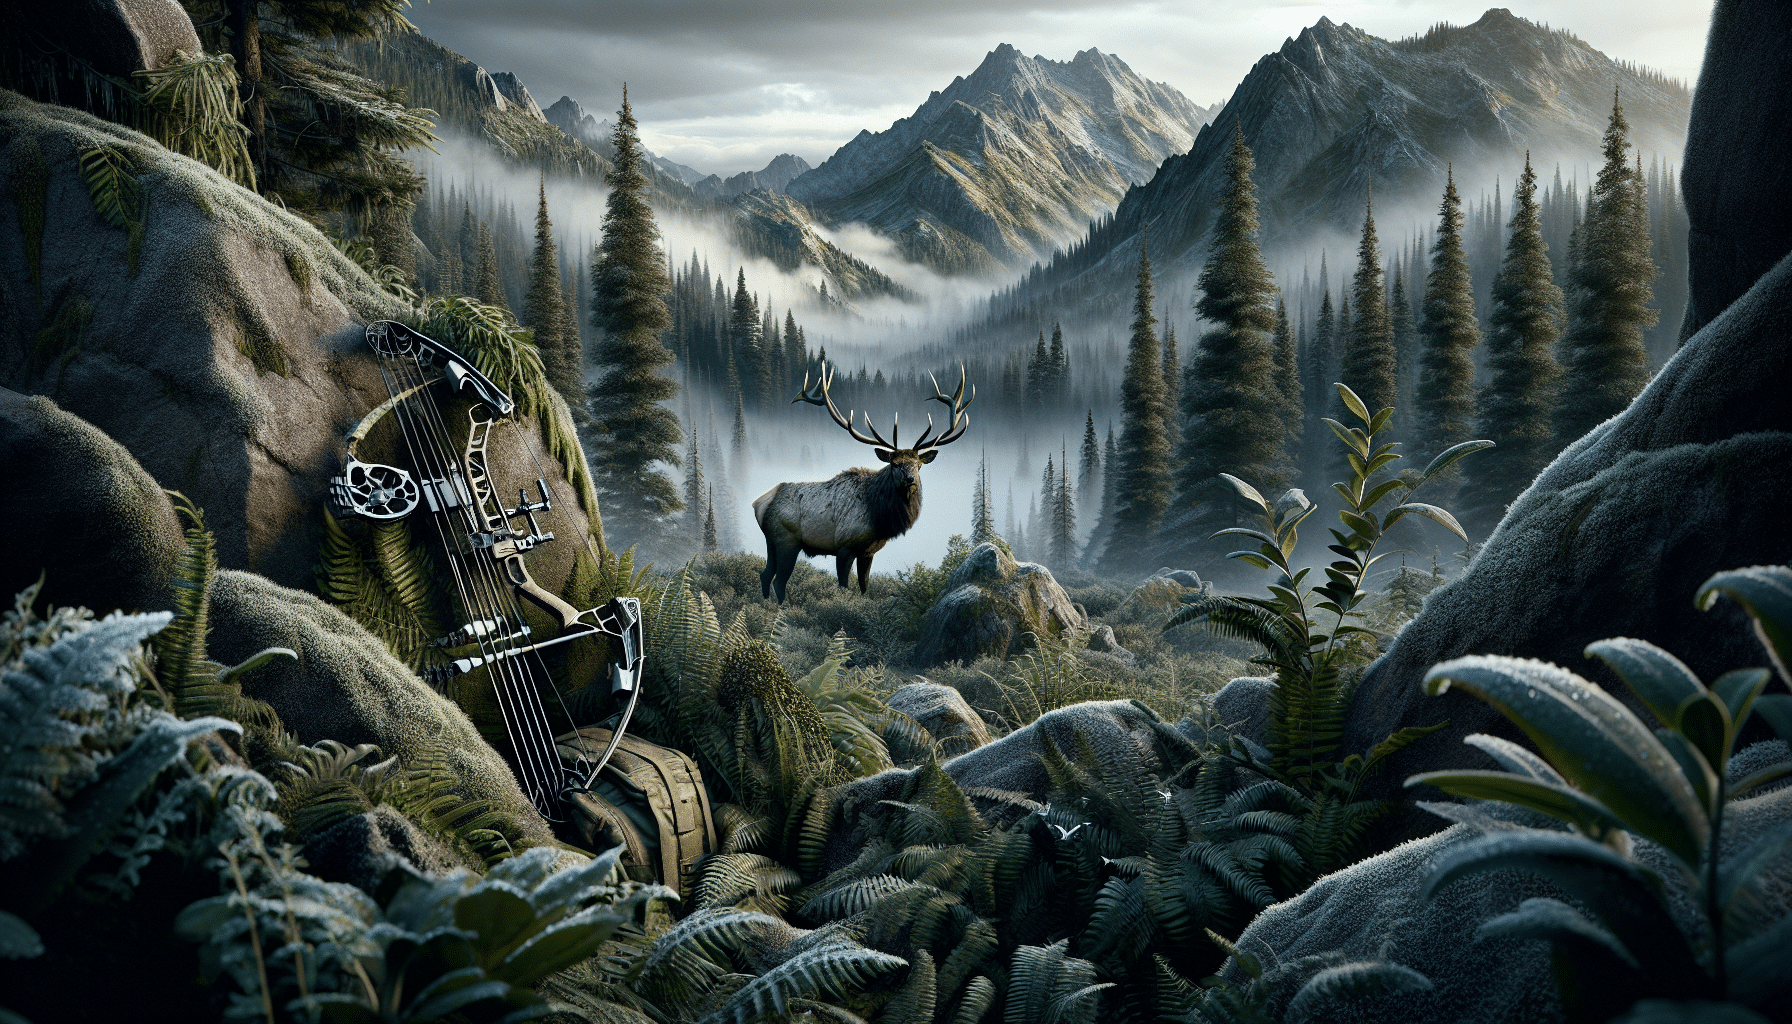 An image showcasing the various challenges of bowhunting for elk. The foreground features a rugged, mountainous terrain with dense forests indicating the difficult navigation. A prominent elk is seen in the middle distance, marked by its impressive antlers, signifying the elusive nature of the prey. Carefully concealed among the foliage is a bow and a set of arrows, depicting the primitive and skill-intensive equipment used. Challenging weather elements like mist and frost could be subtly incorporated into the scene. There are no human figures, brand names, logos, or text visible in the image.